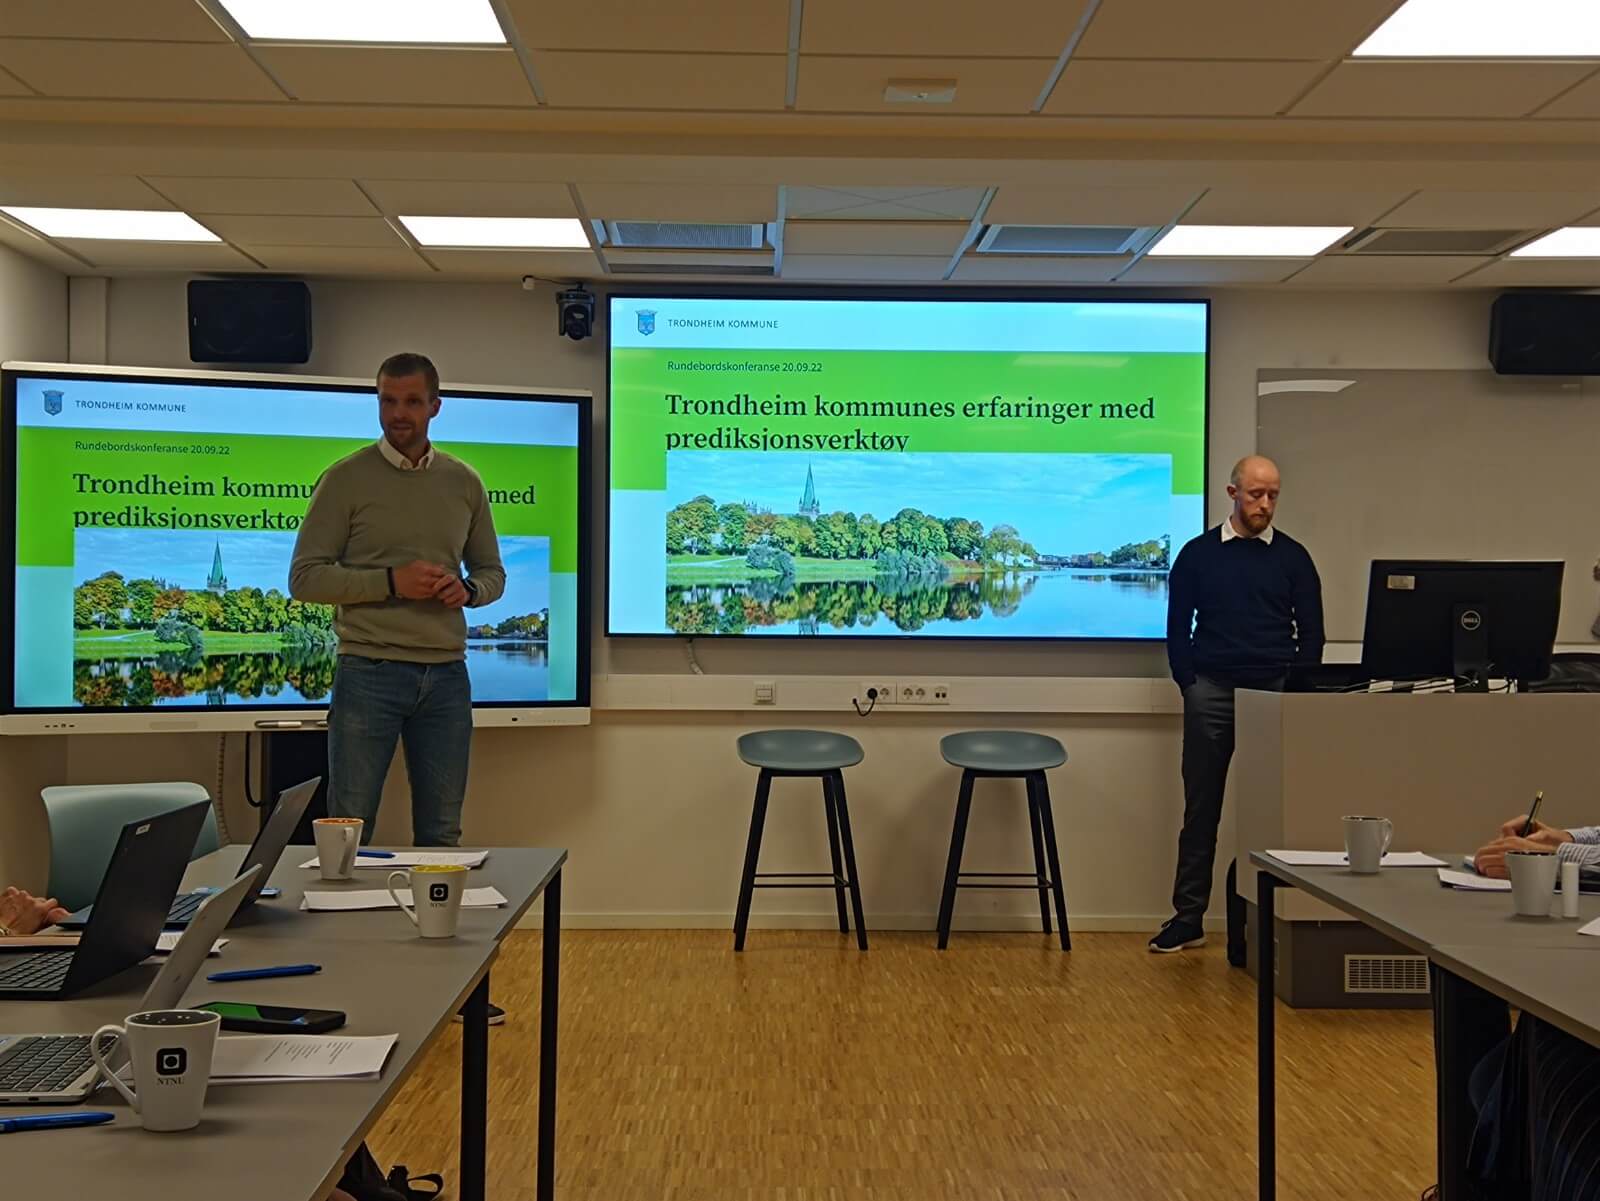 Lars Dyrdahl and Øyvind Melgård from Trondheim municipality sharing how they are leveraging technology to optimise staff planning